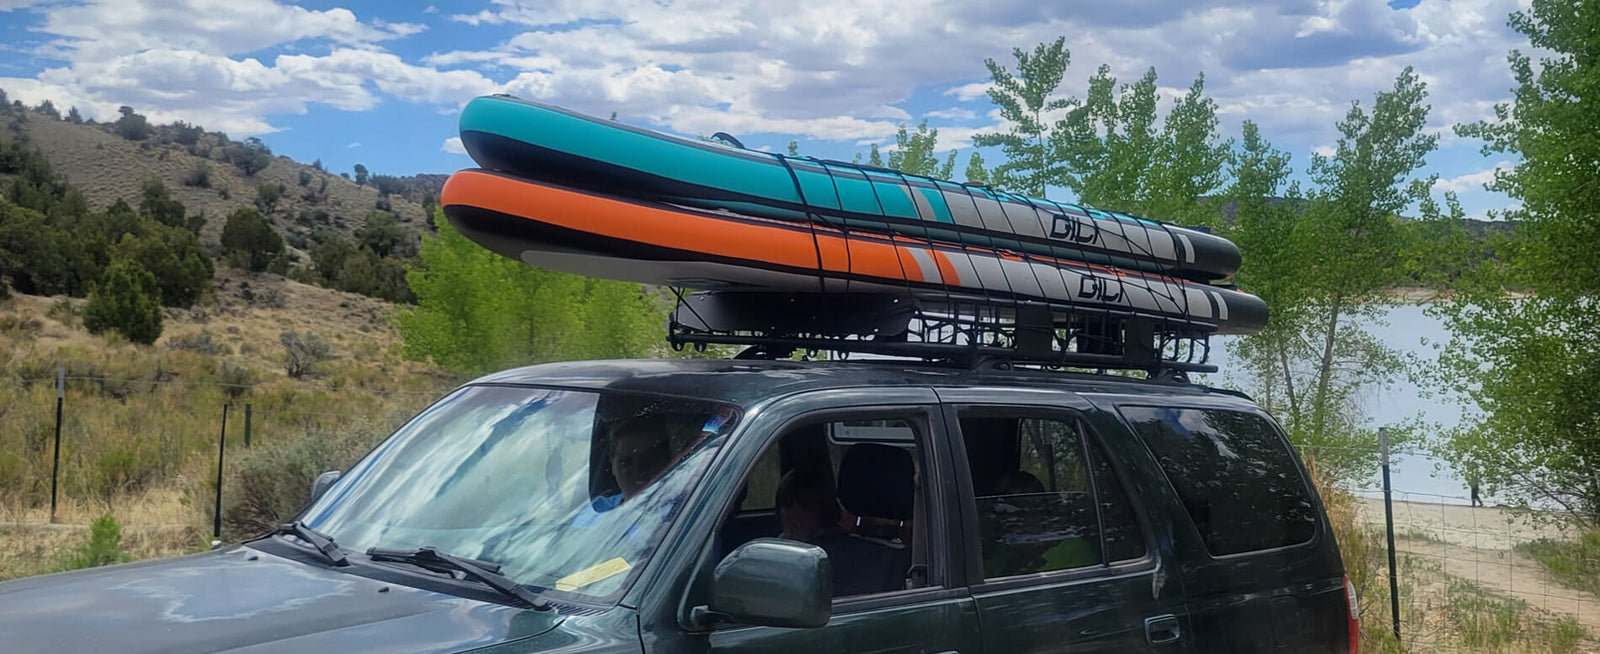 Best Stand Up Paddle Board Roof Racks | GILI Sports